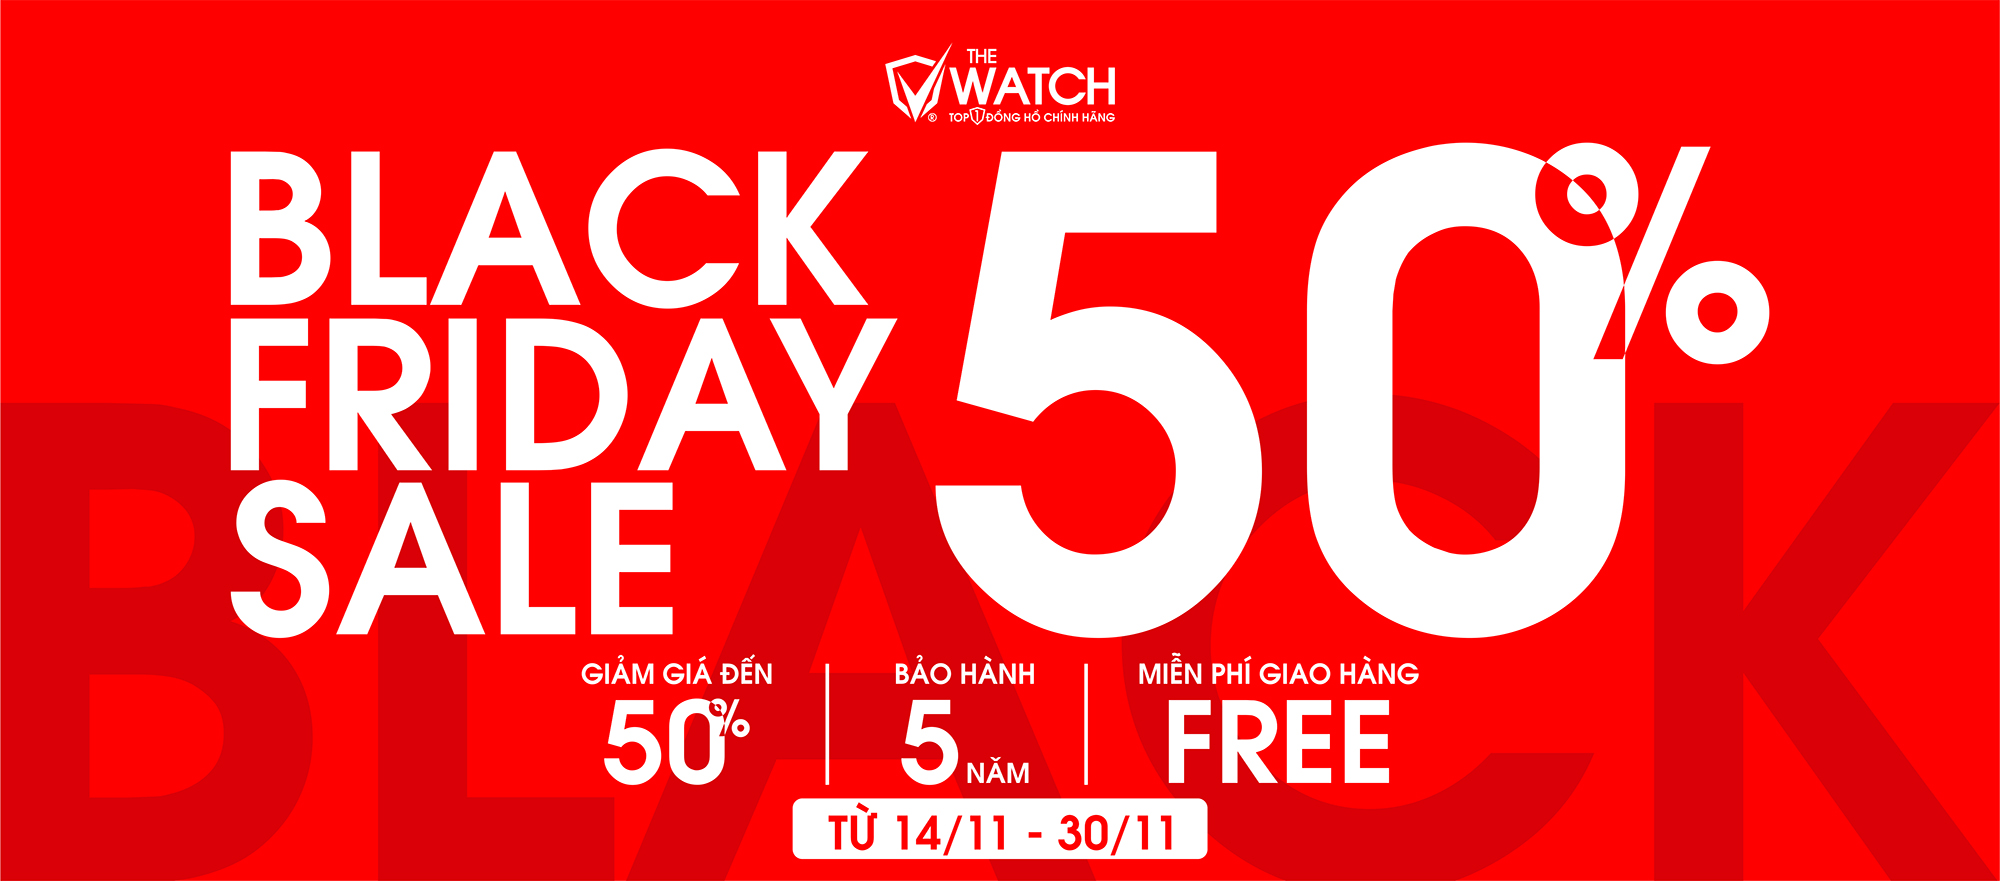 Black Friday sale 50% dong ho the watch